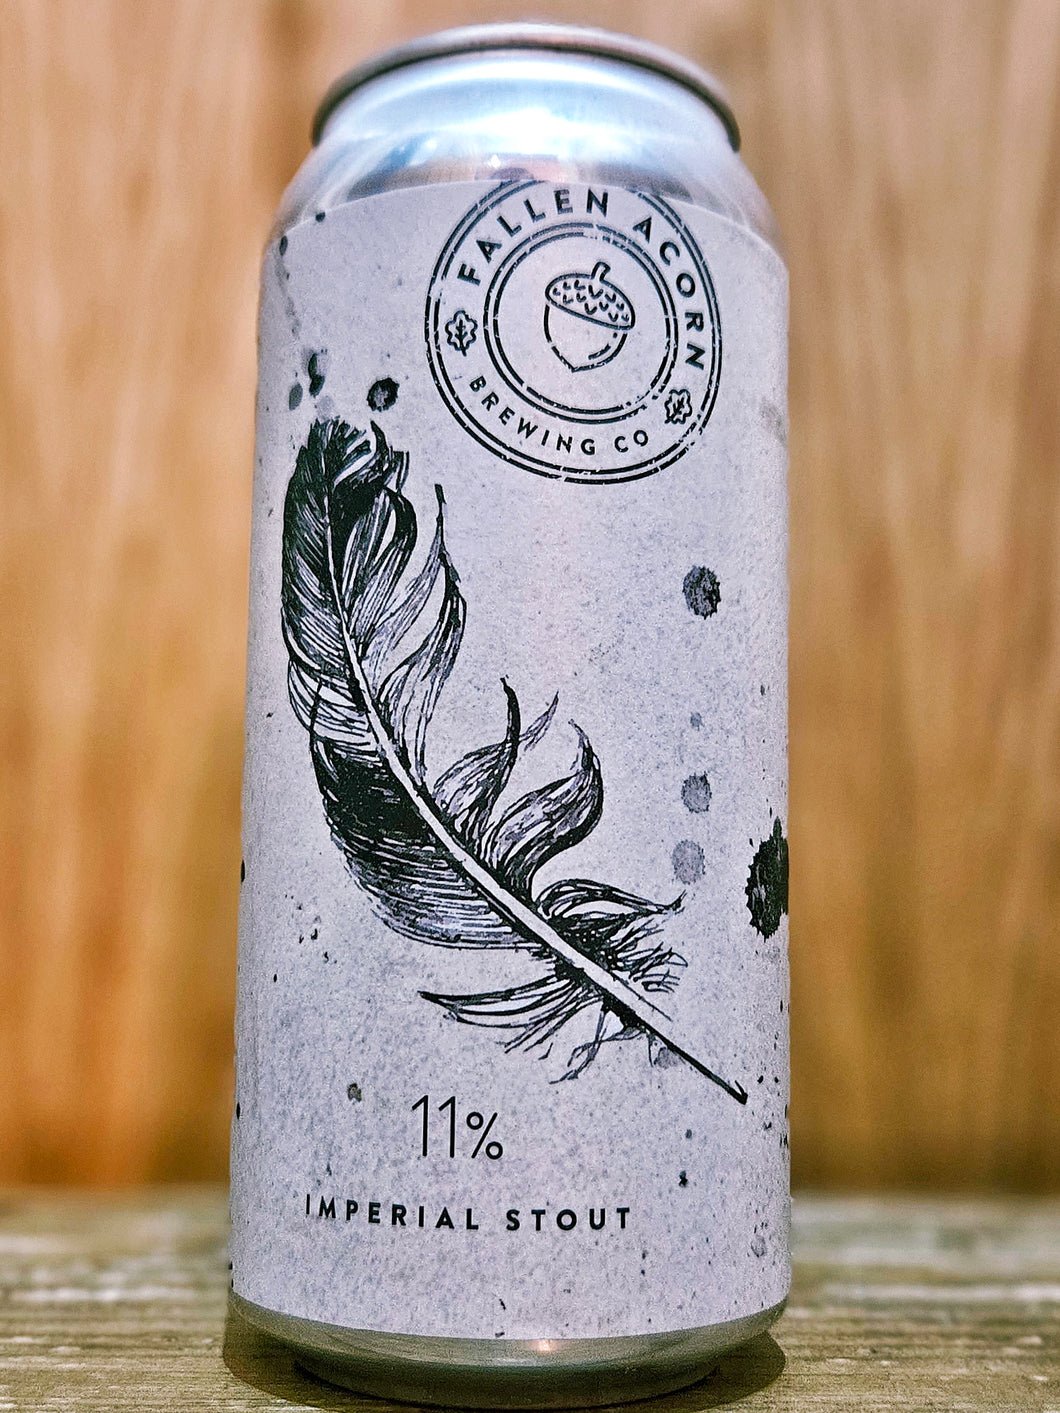 Fallen Acorn Brewing Co - We Had The World In Our Hands